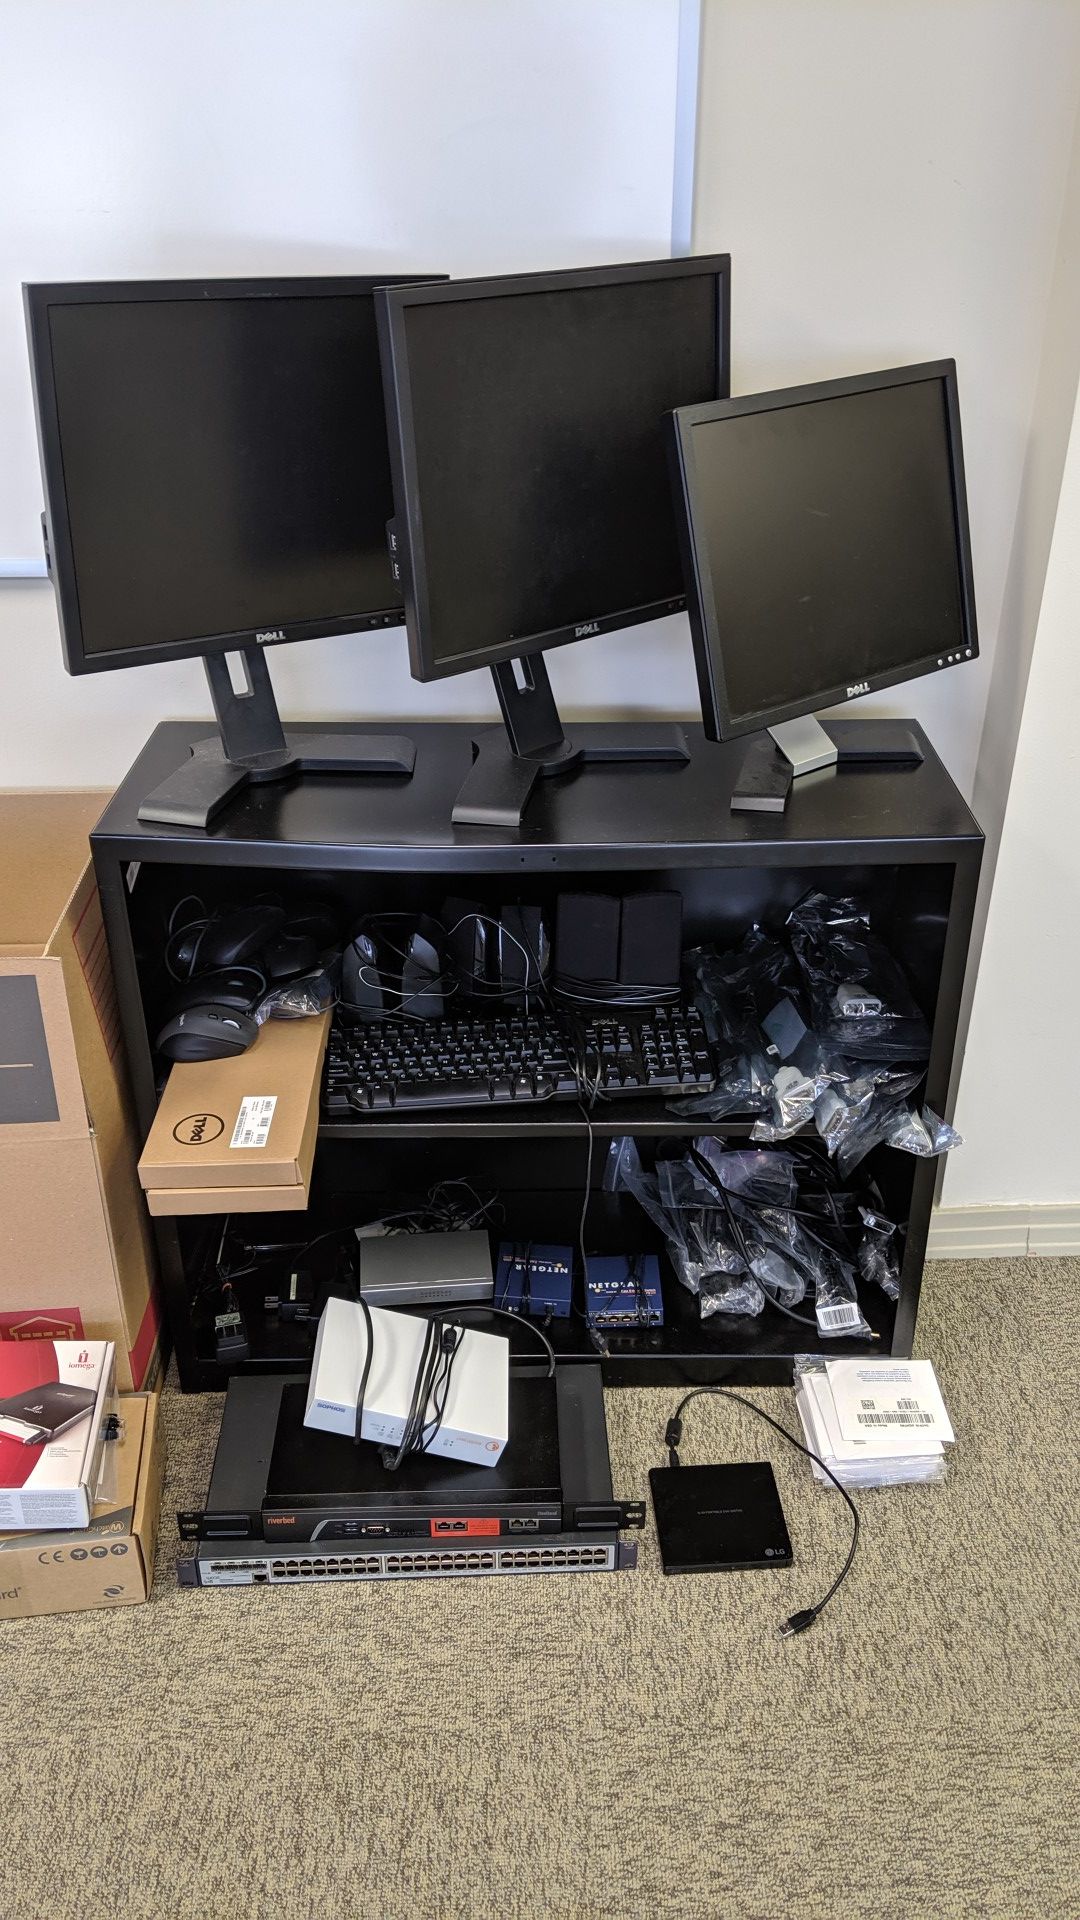 Office computer network equipment-monitors, switches, firewalls,